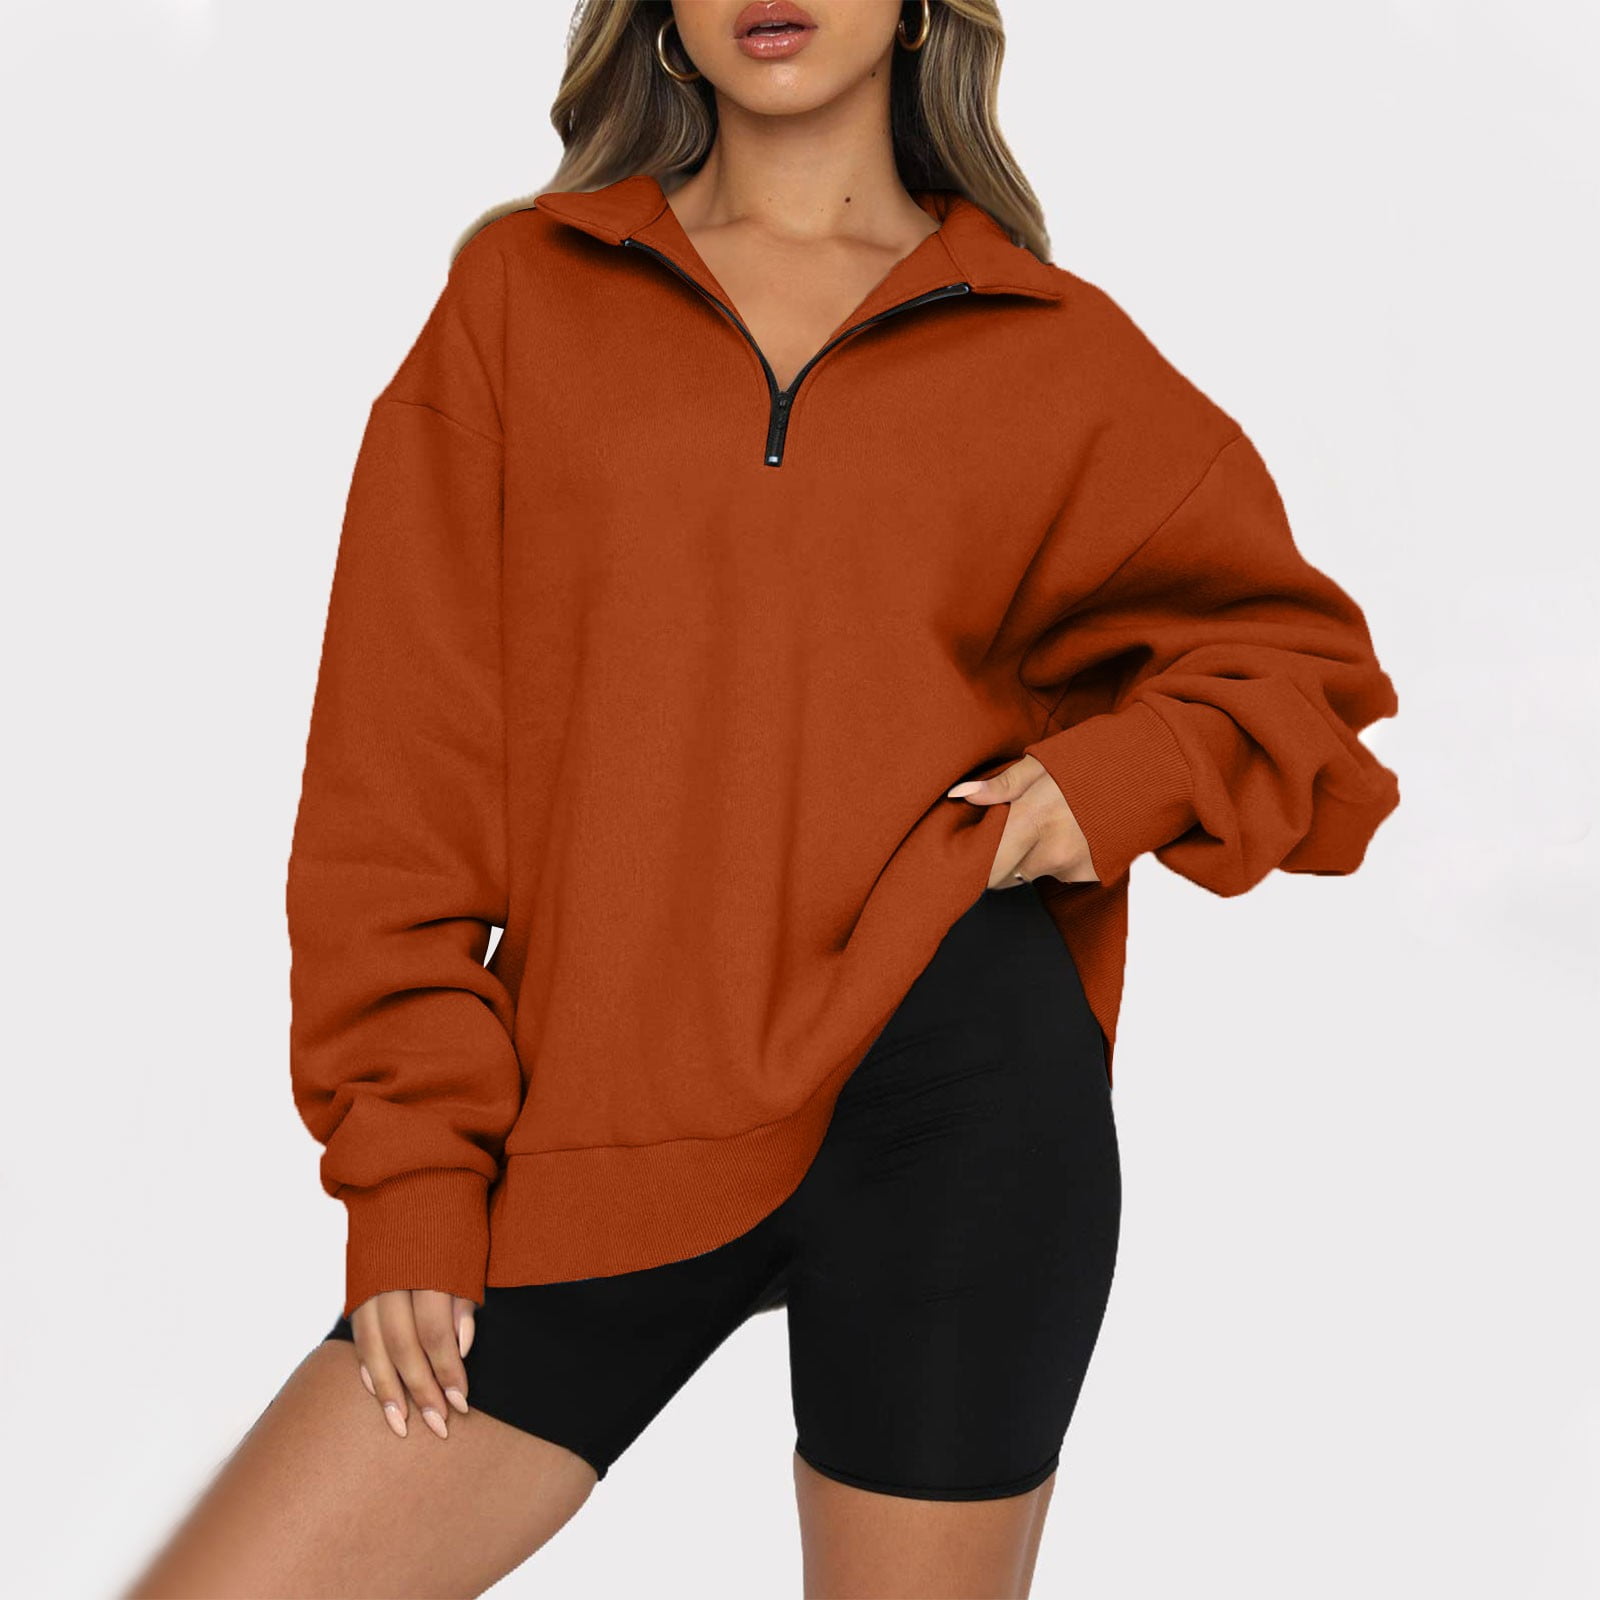 TQWQT Oversized Hoodie for Women Half Zip Pullover Fleece Quarter Zip Up Hoodies  2023 Fall Fashion Clothes Trendy Outfits,Army Green,L 